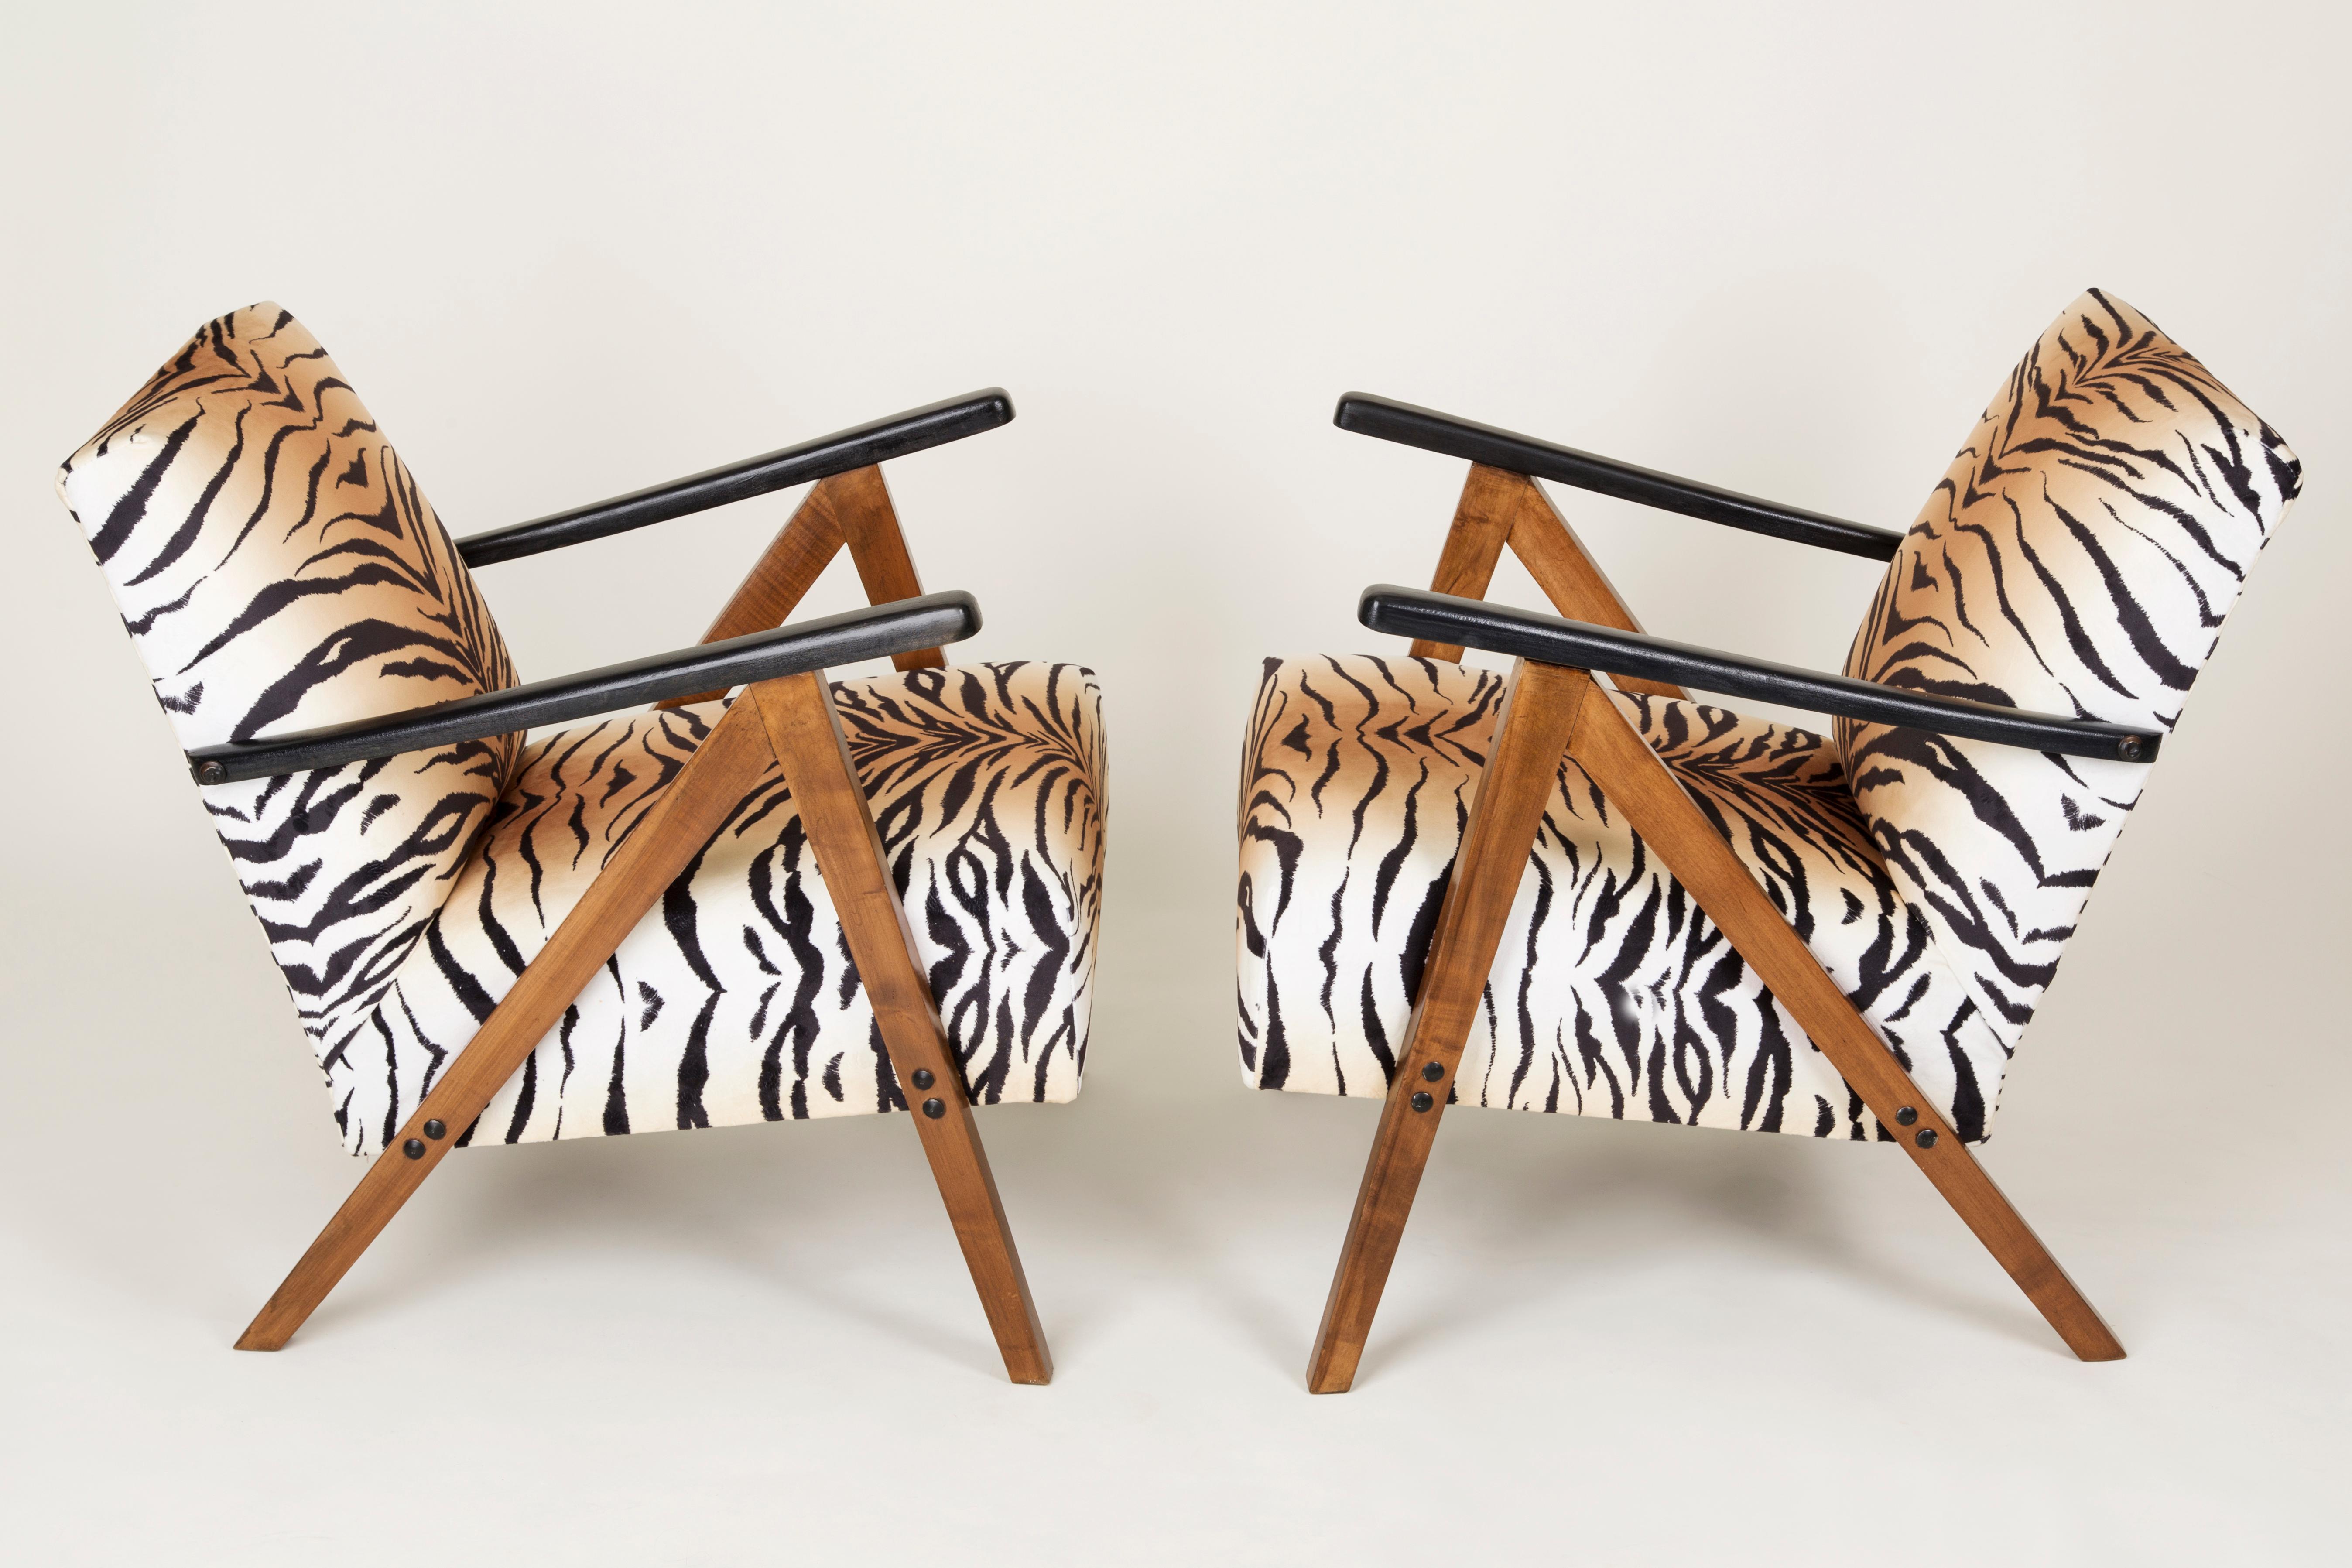 Polish Set of Two Mid-Century Modern Tiger Print Armchairs, 1960s, Germany For Sale